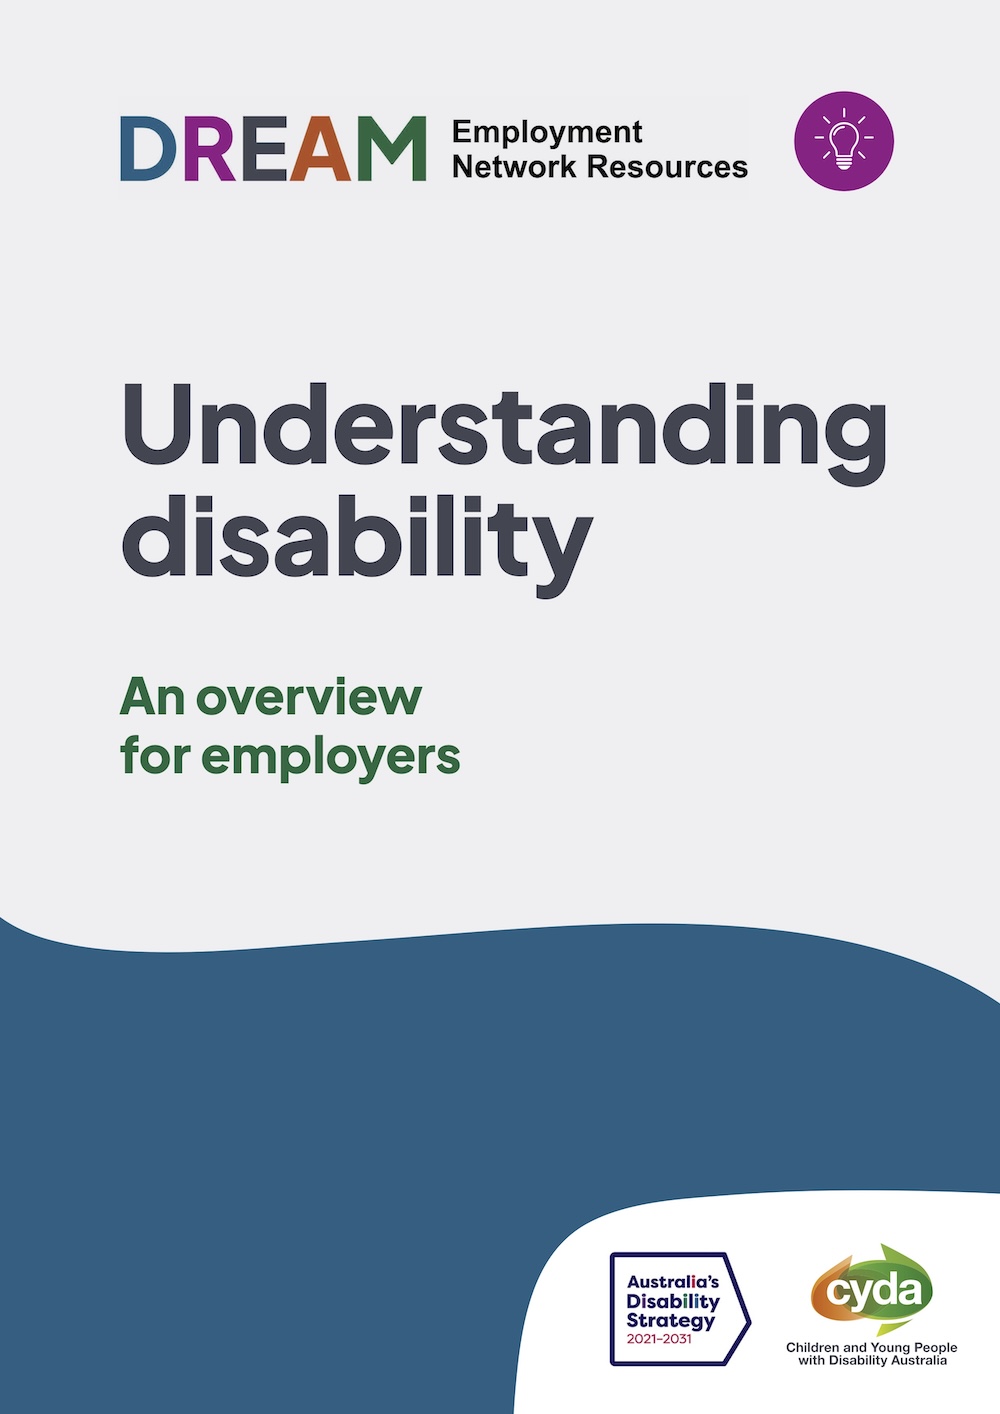 PDF Cover titled "Understanding Disability, an overview for employers" with the logo for the DREAM Employment Network with a purple lightbulb graphic up the top, and the logos for the Australian Disability Strategy and CYDA down the bottom.